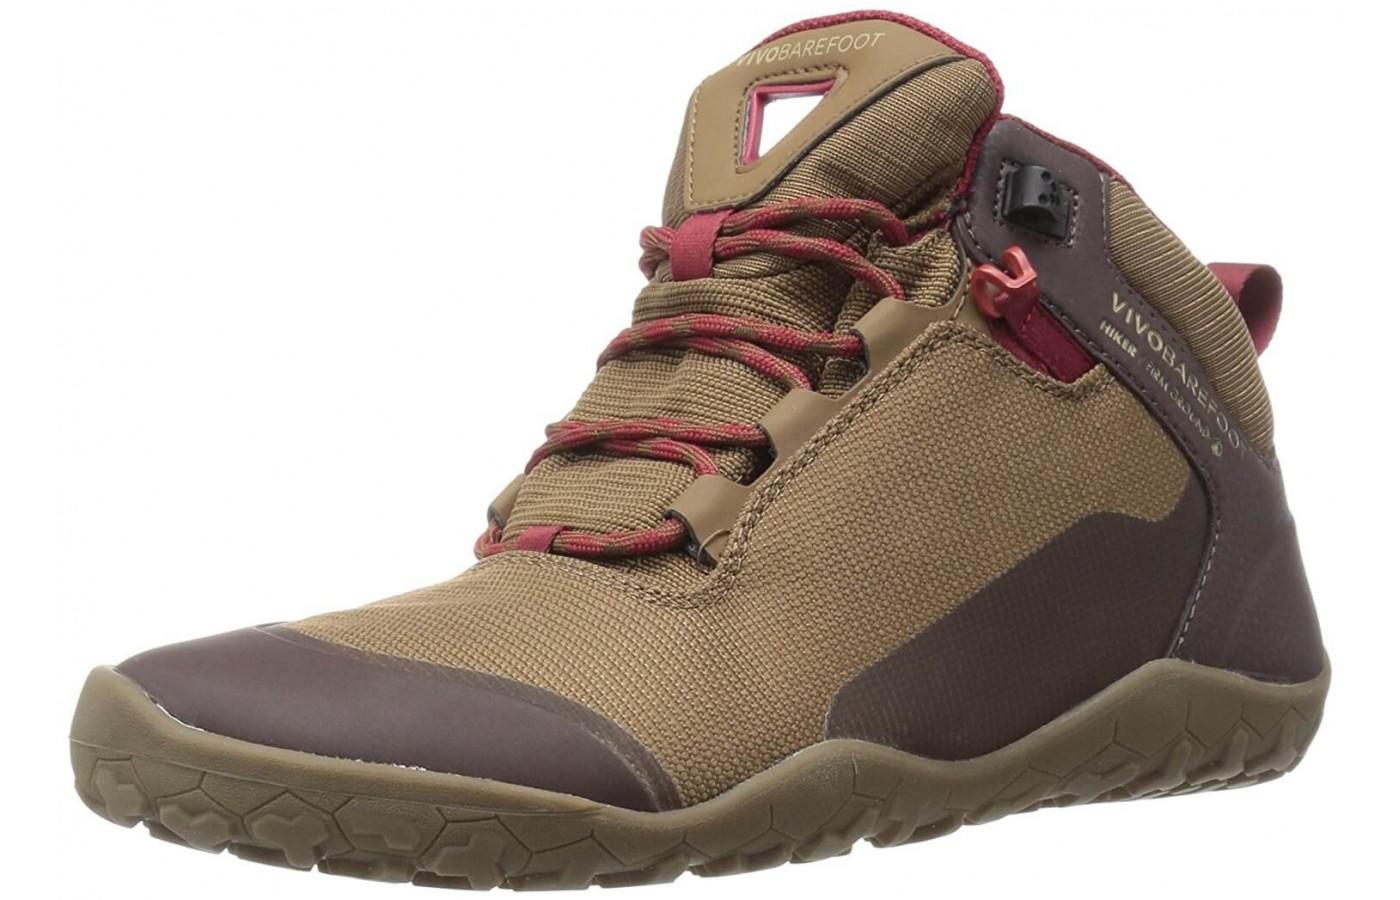 Earth tones and zero drop makes this a beautiful and comfortable hiking boot